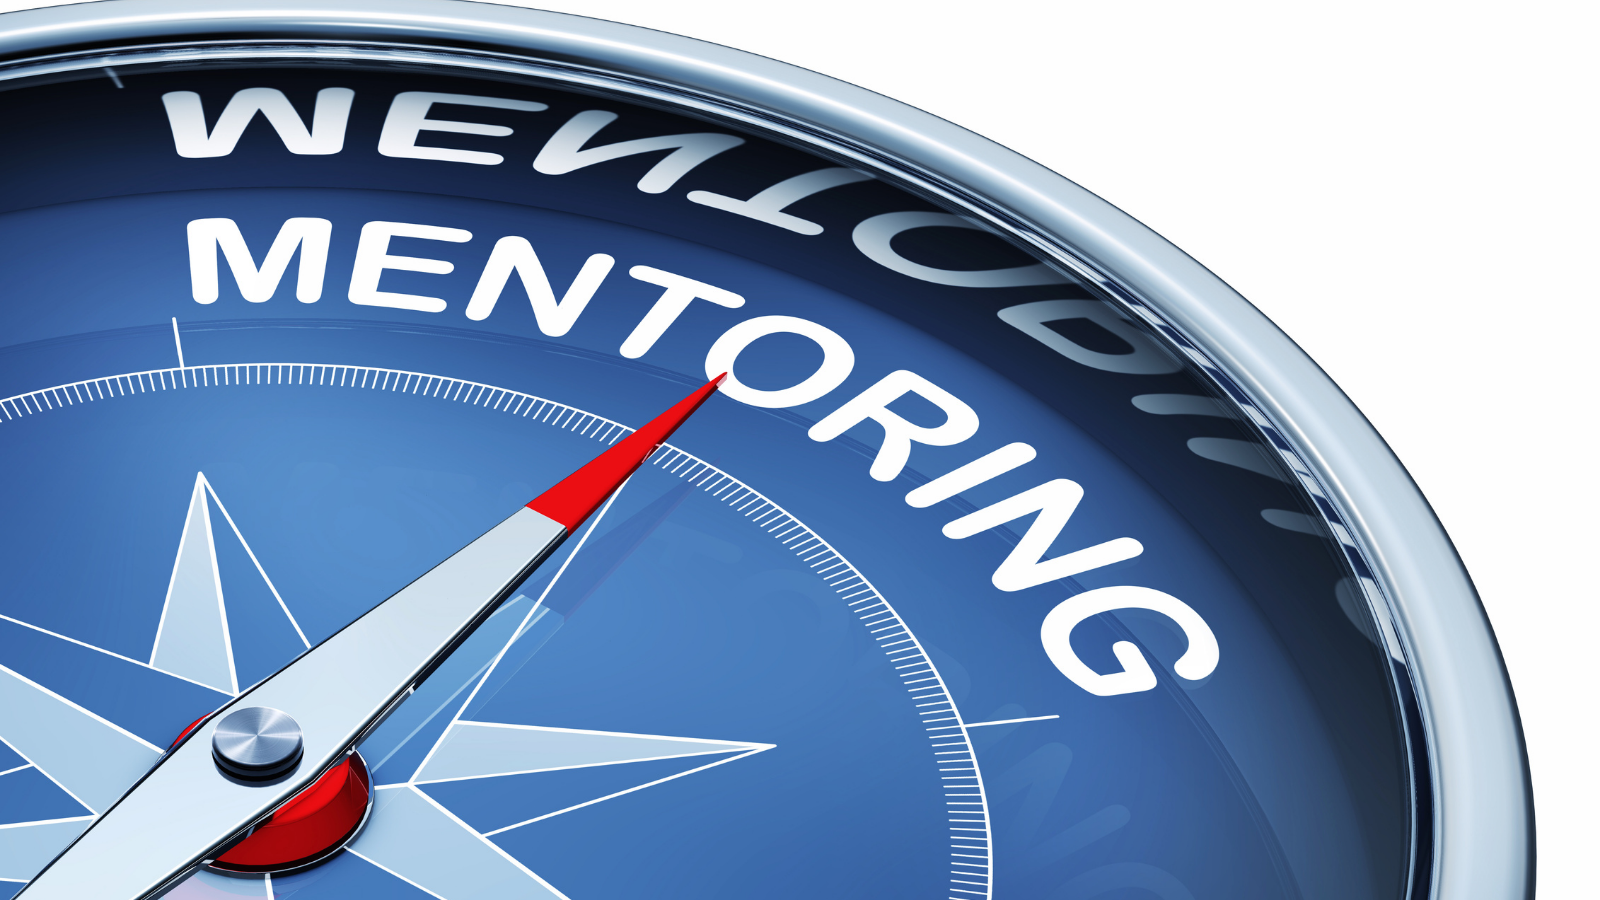 Reflection on 30 years of Mentoring